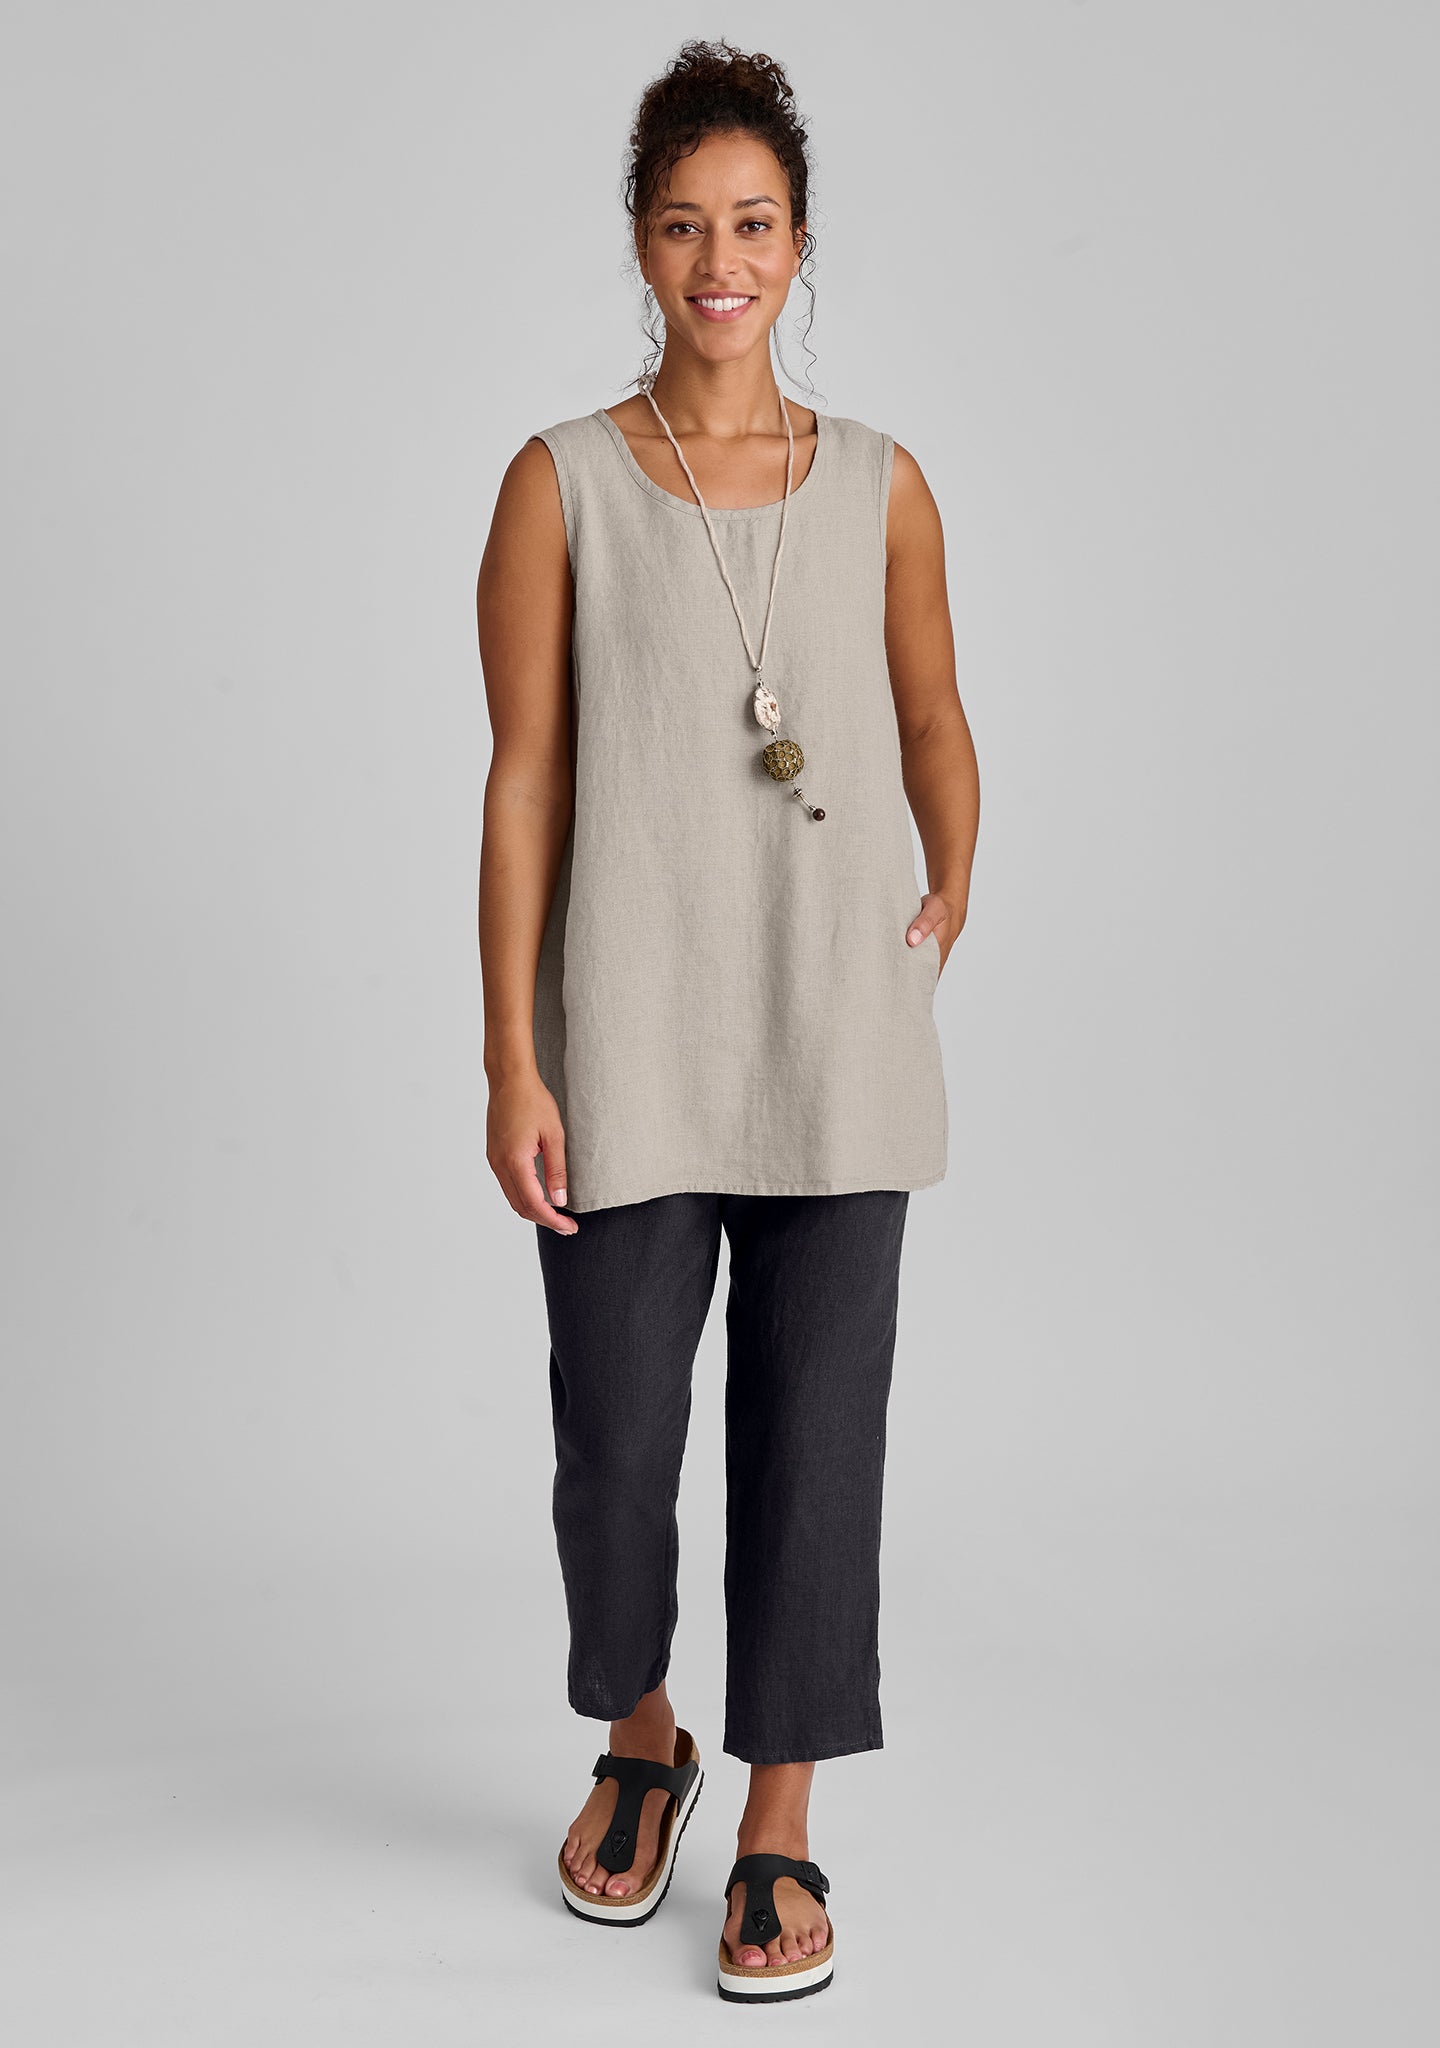 FLAX linen tank in natural with linen pants in grey